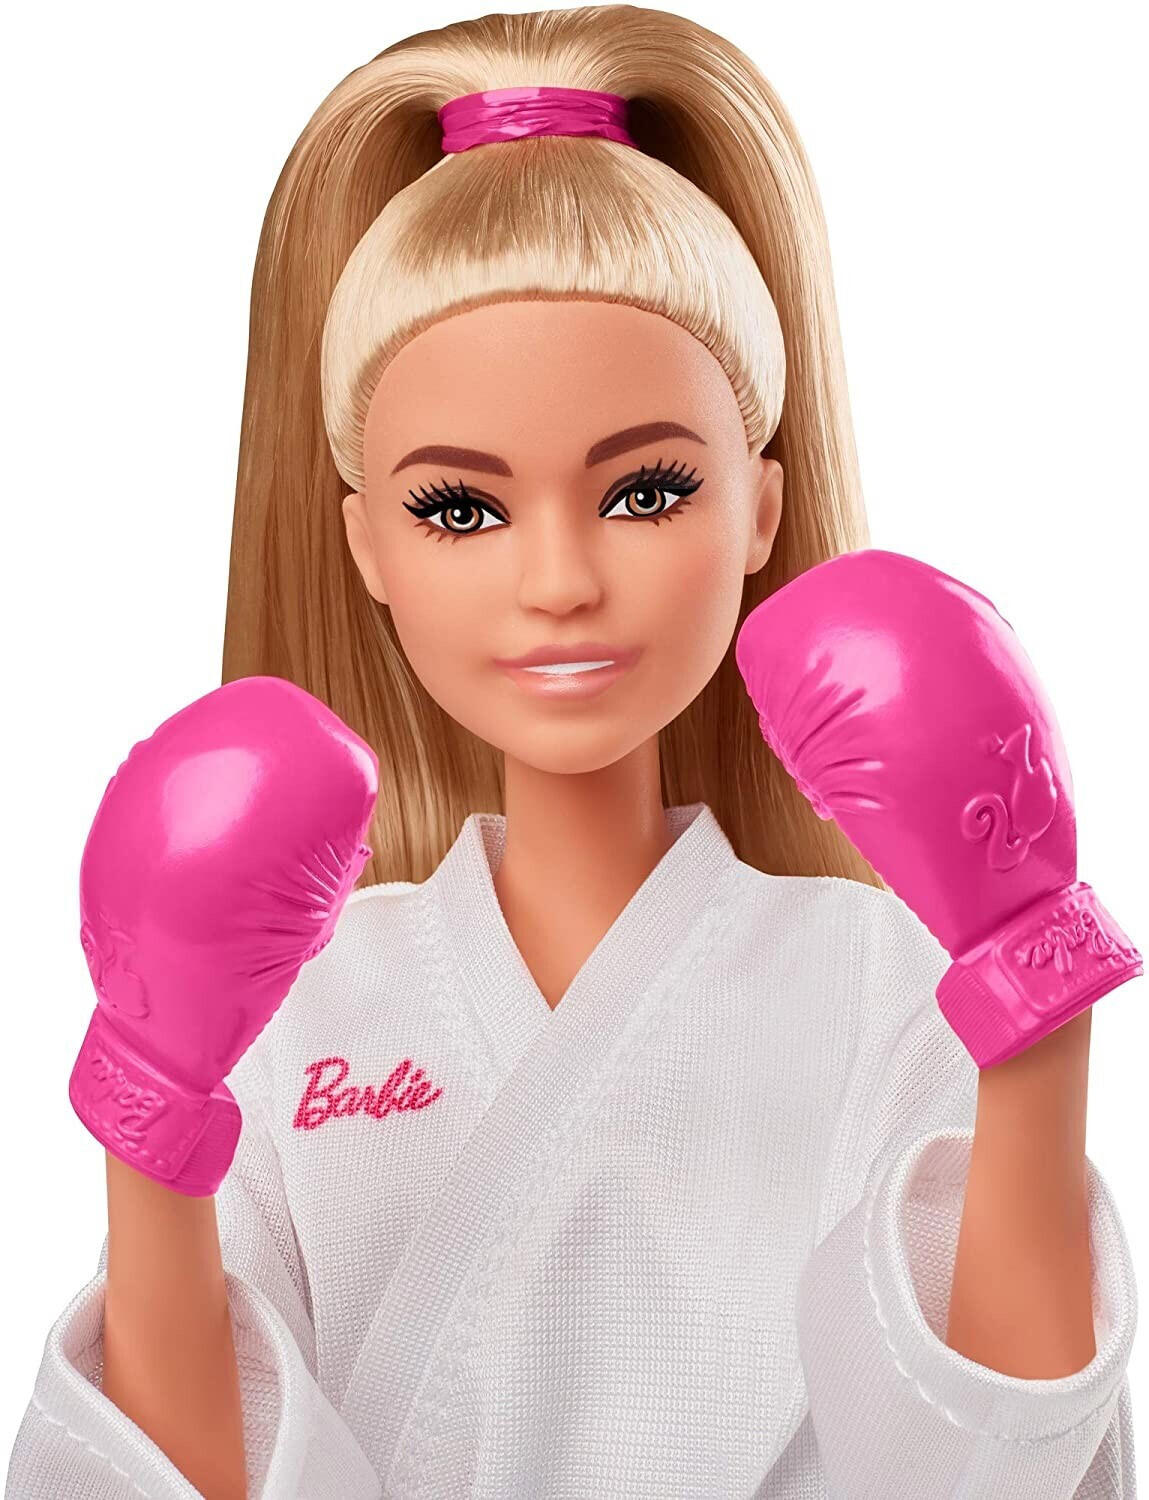 Barbie You Can be Anything Tokyo Olympics 2020 Karate Doll GJL74